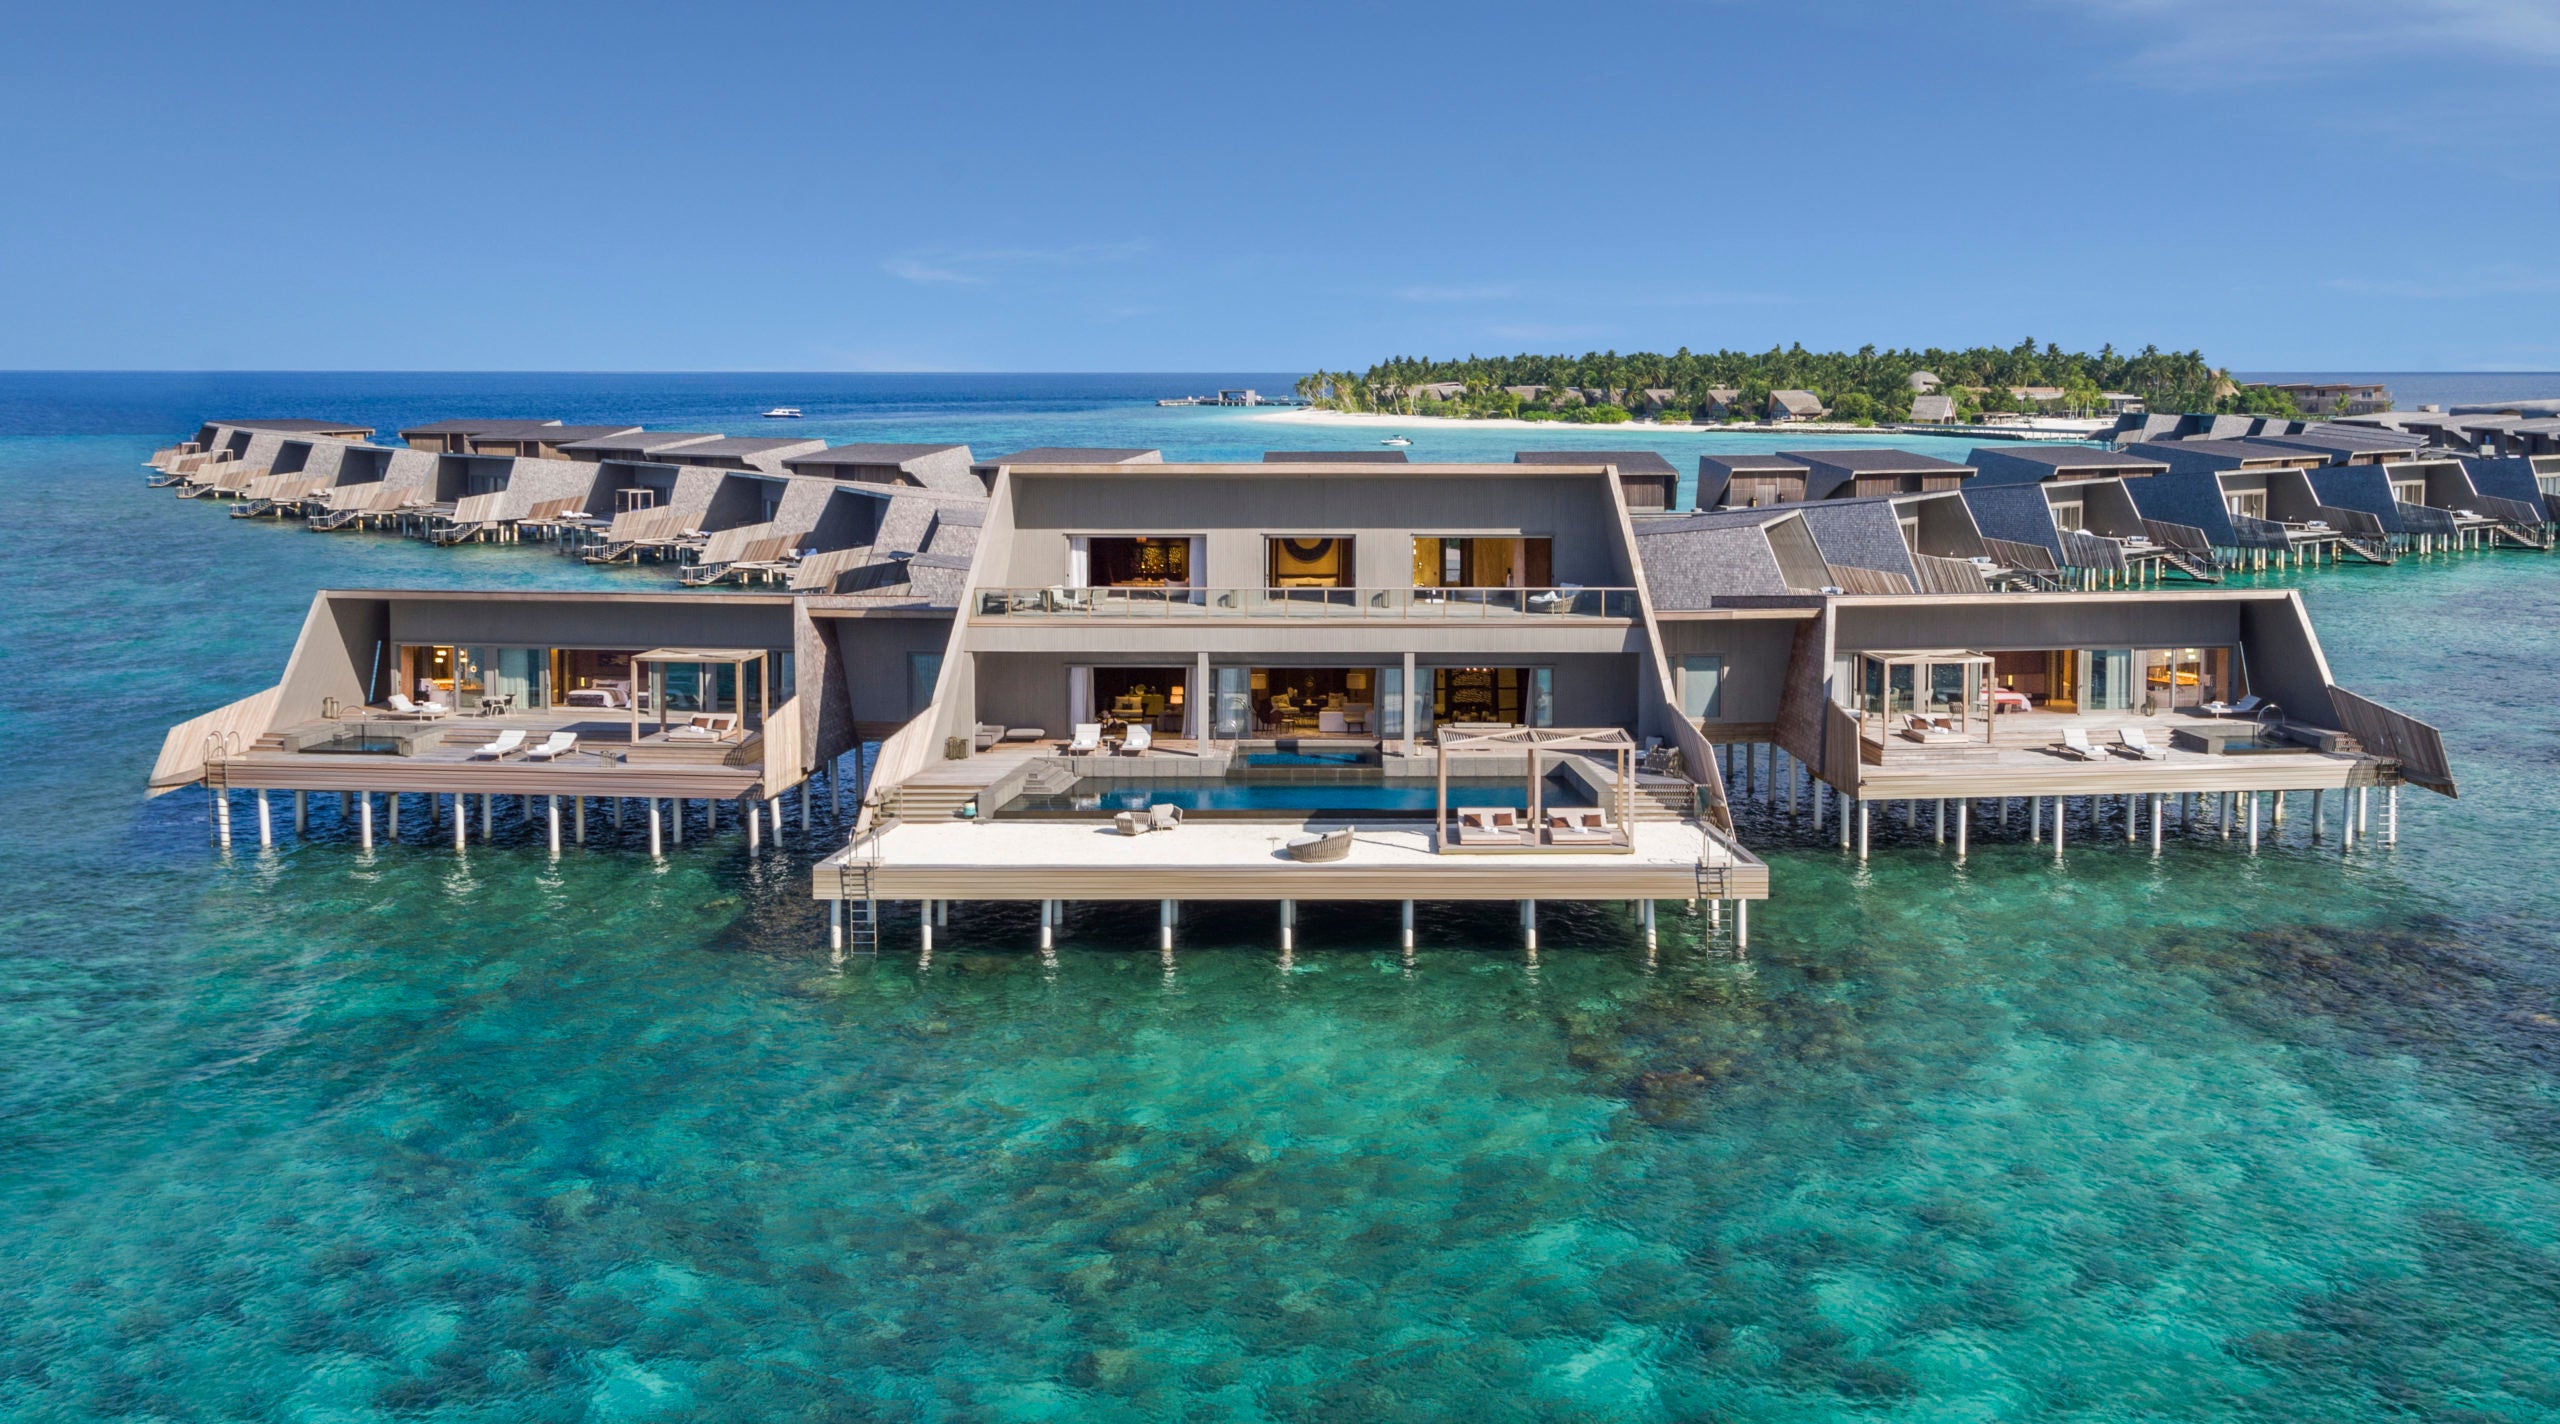 The Top Hotel Suites in The Maldives